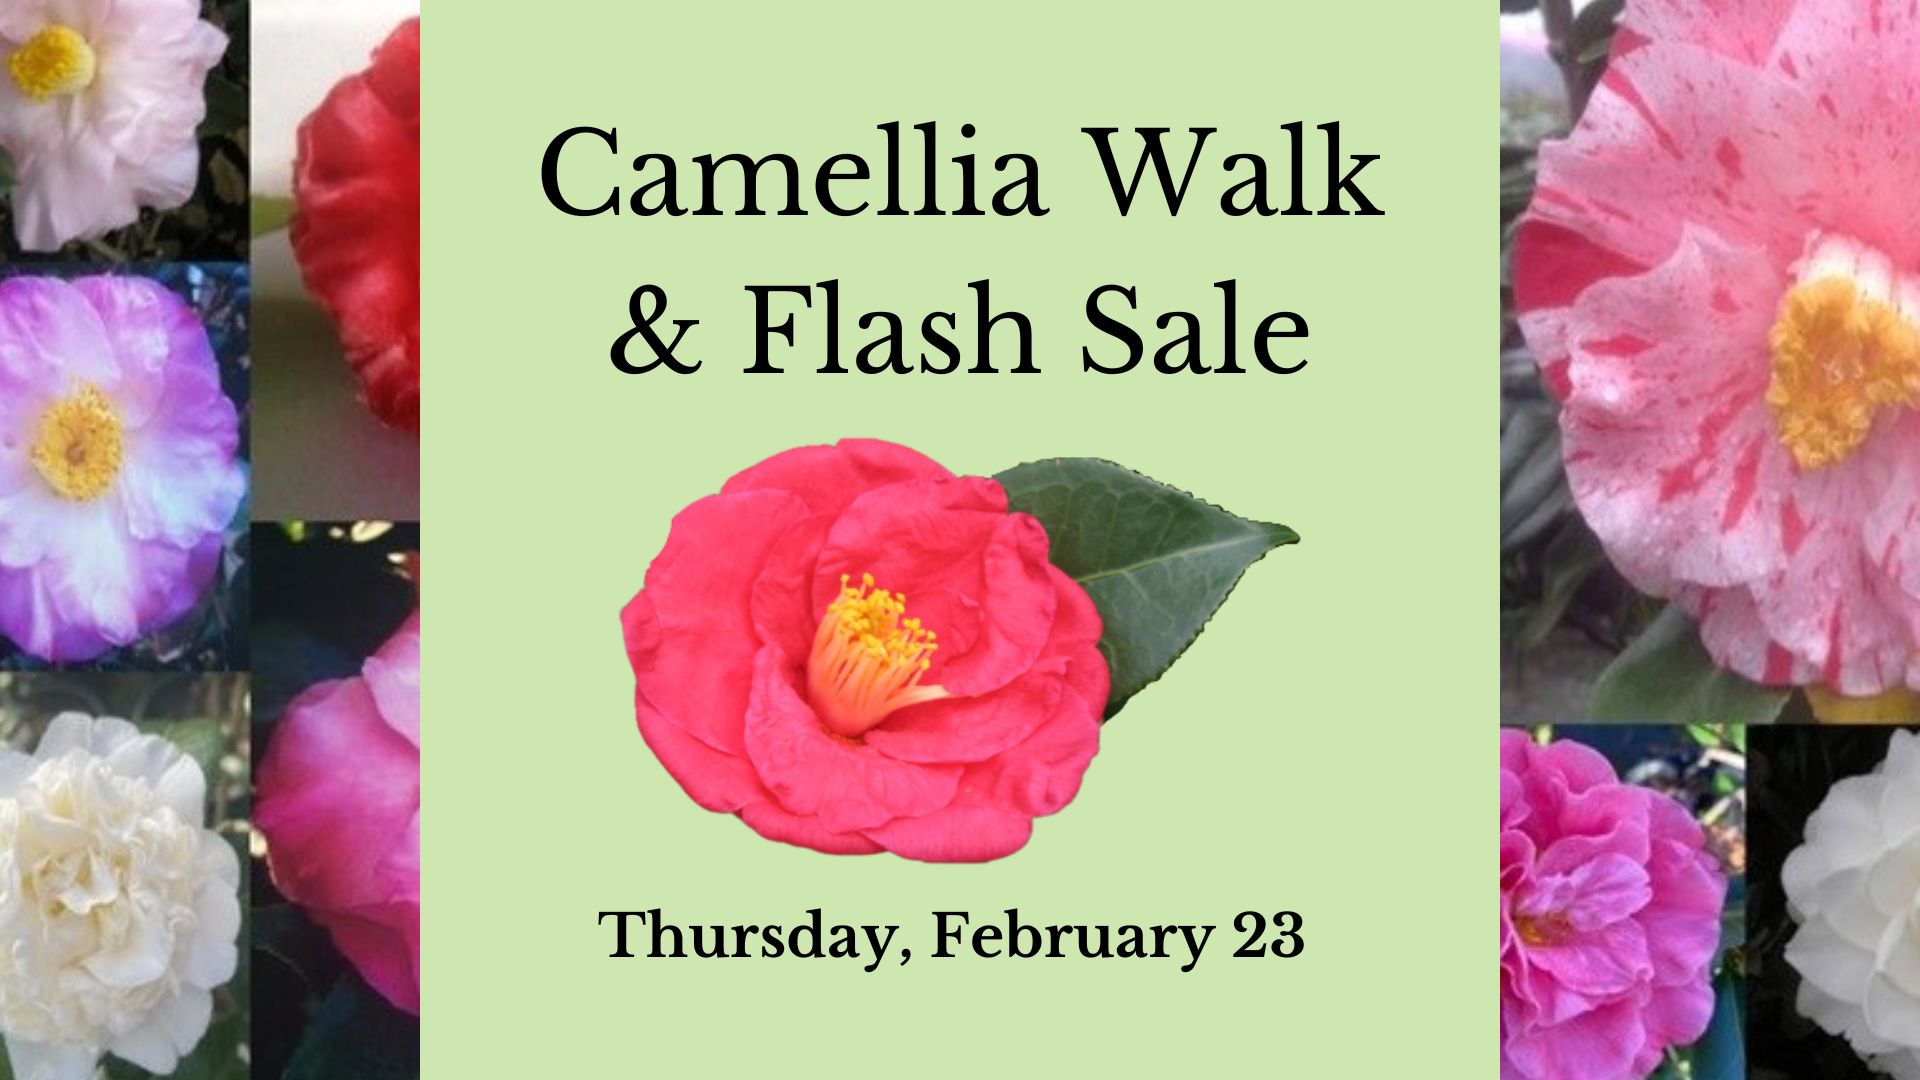 Promo graphic for Camellia Walk & Flash Sale Event, brown text on green background with clipped photo of red camellia in center